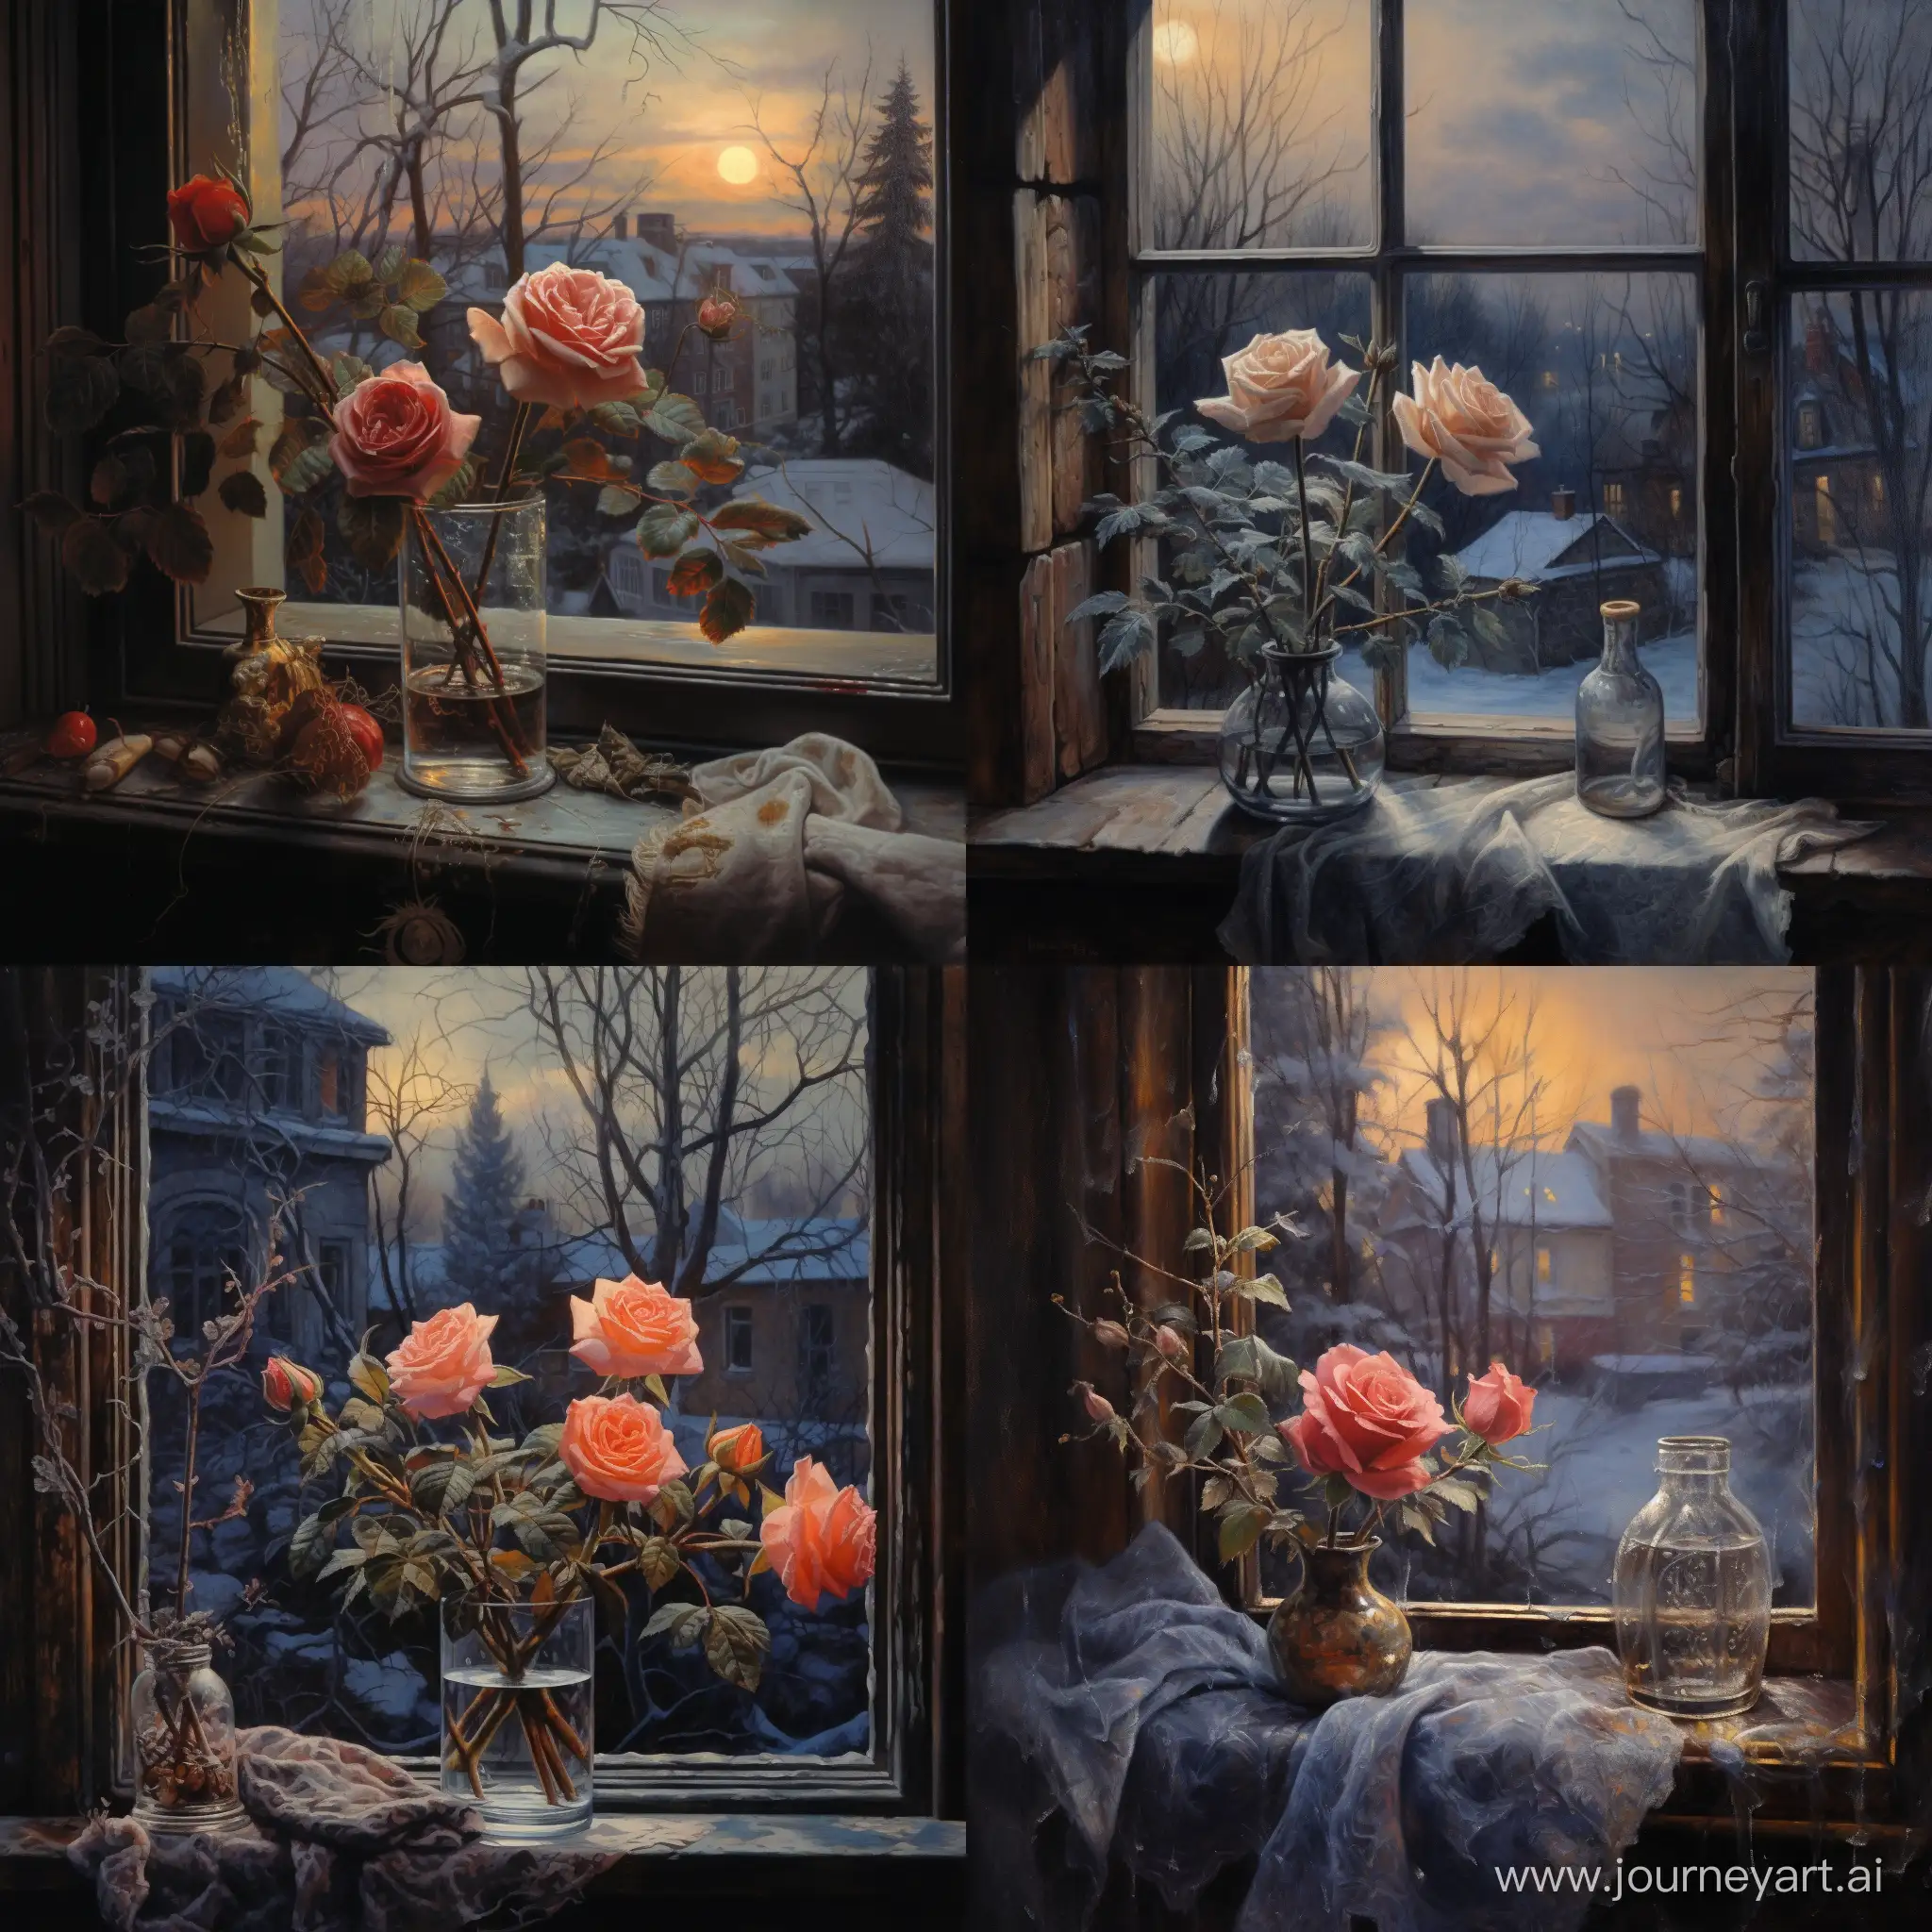 Nocturnal-Winter-Landscape-with-Rose-on-Windowsill